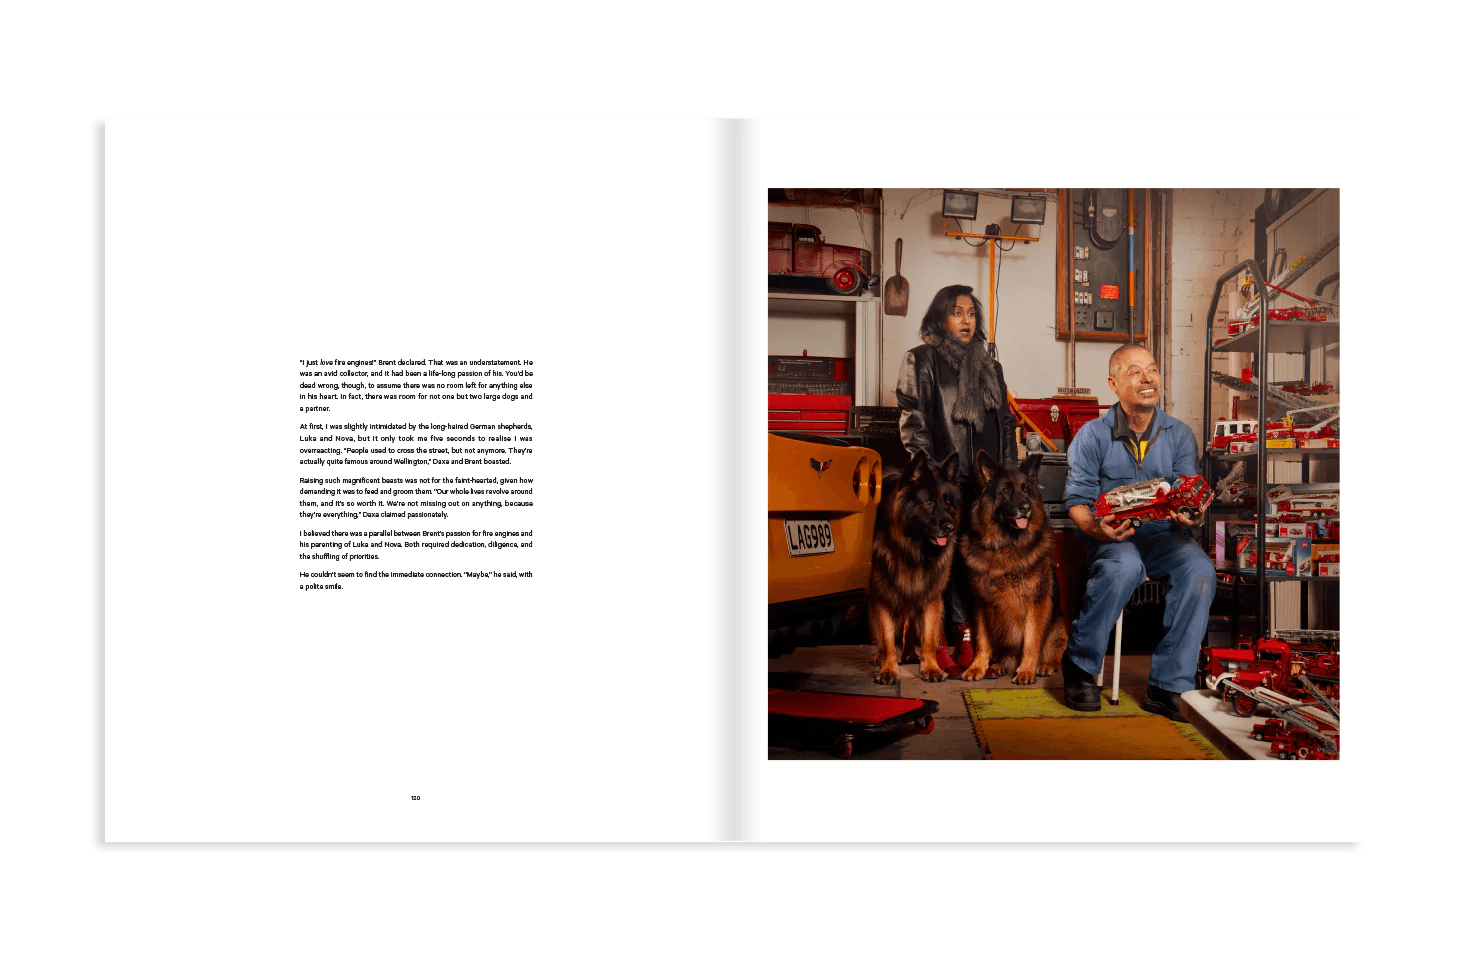 Dogs With Stories - Capturing New Zealanders With Their Four-Legged Best Friends - The Flower Crate